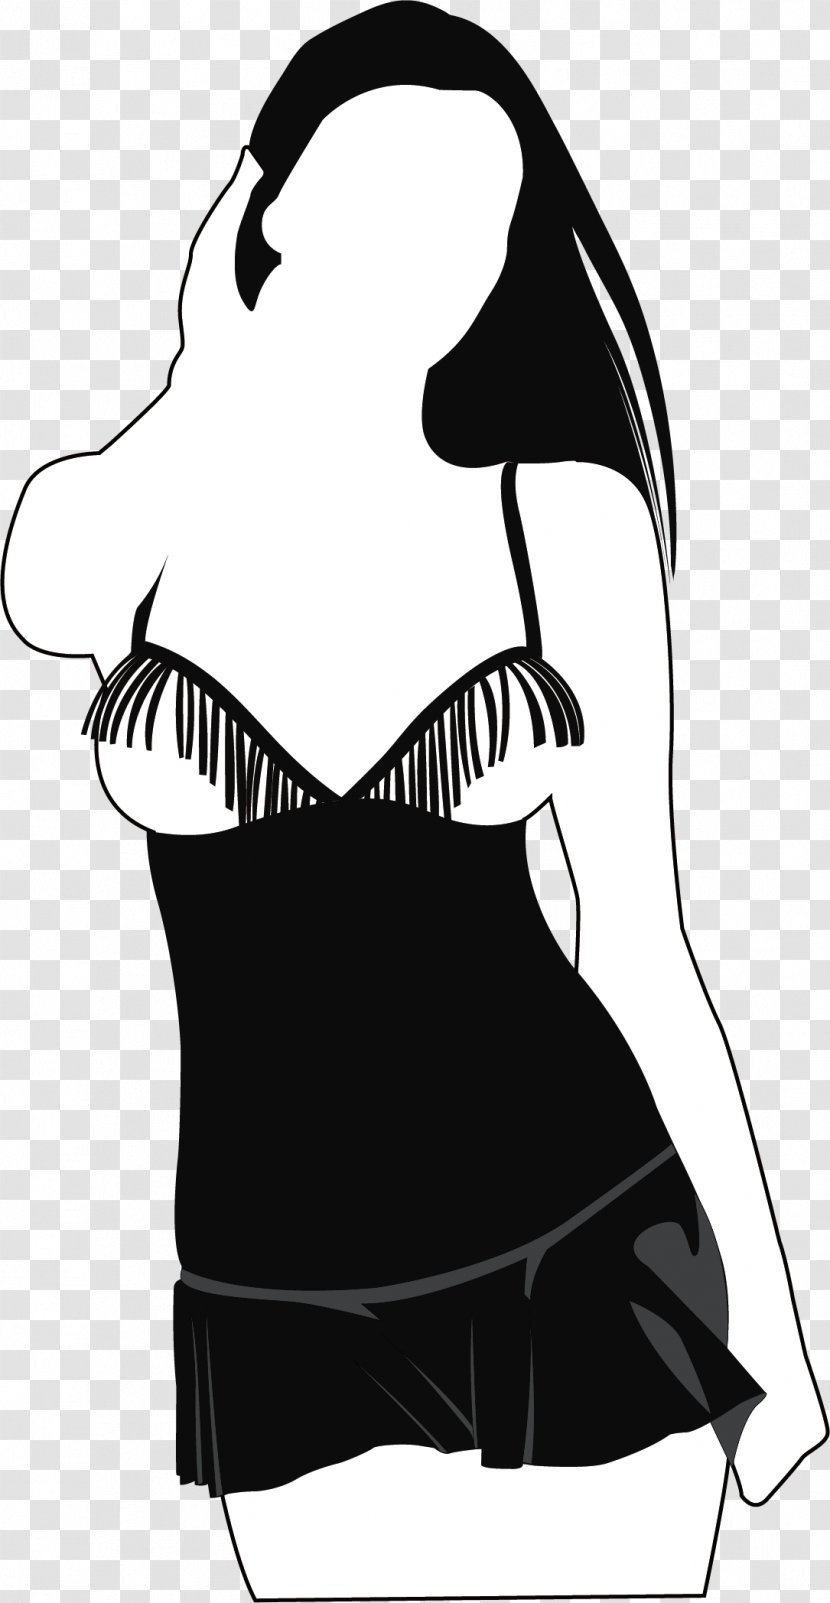 Woman Silhouette Black And White Illustration - Watercolor - Cartoon Transparent PNG